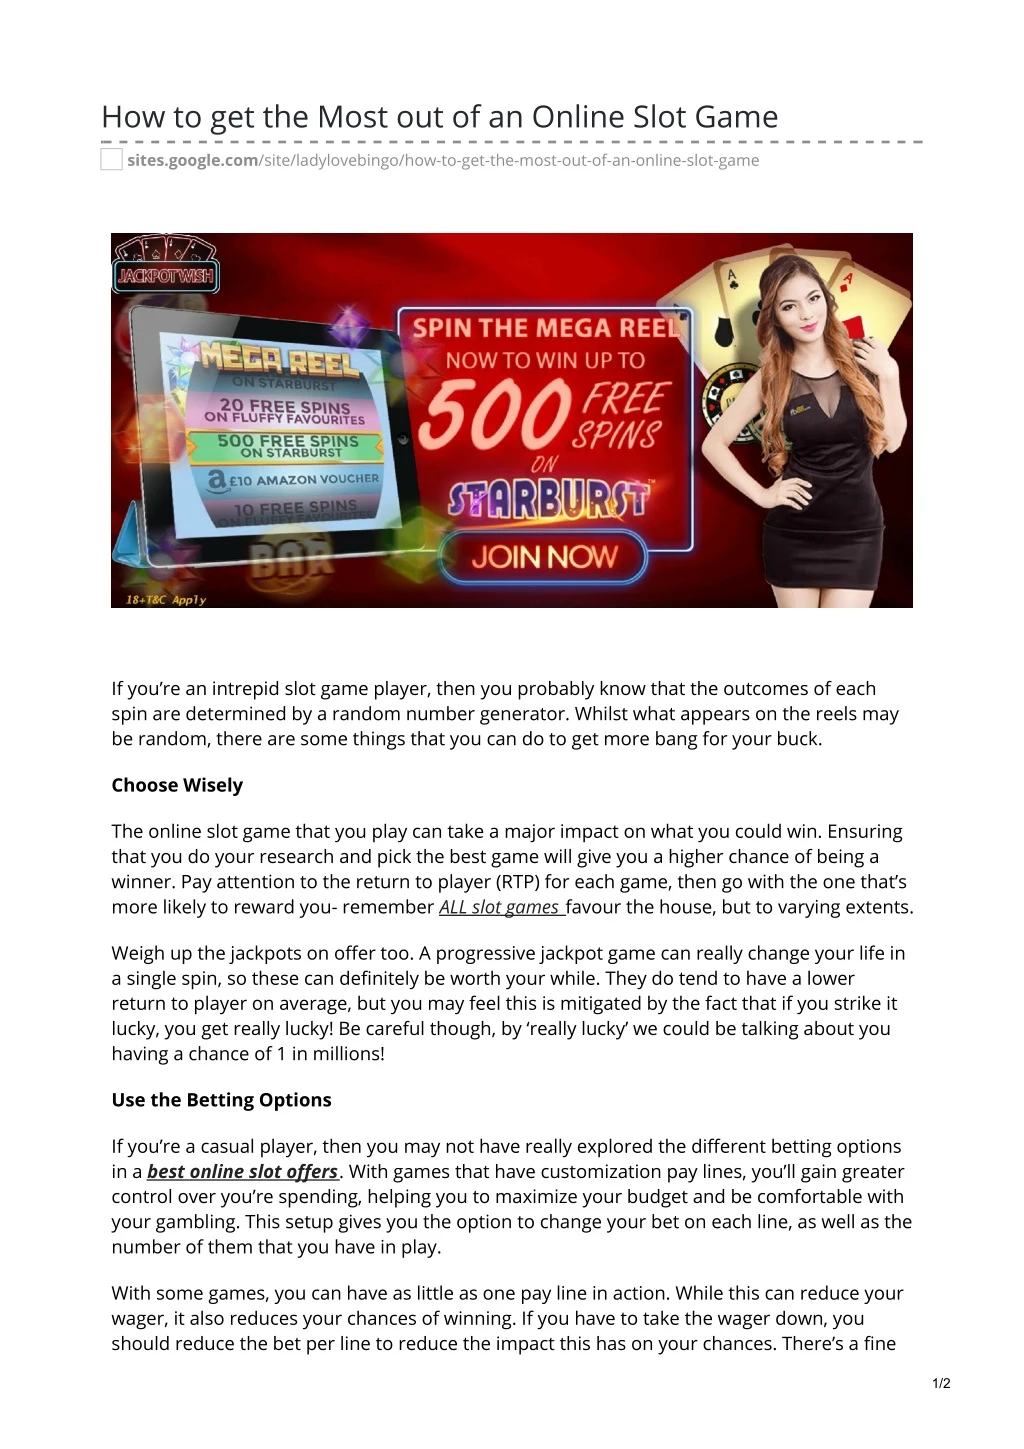 how to get the most out of an online slot game